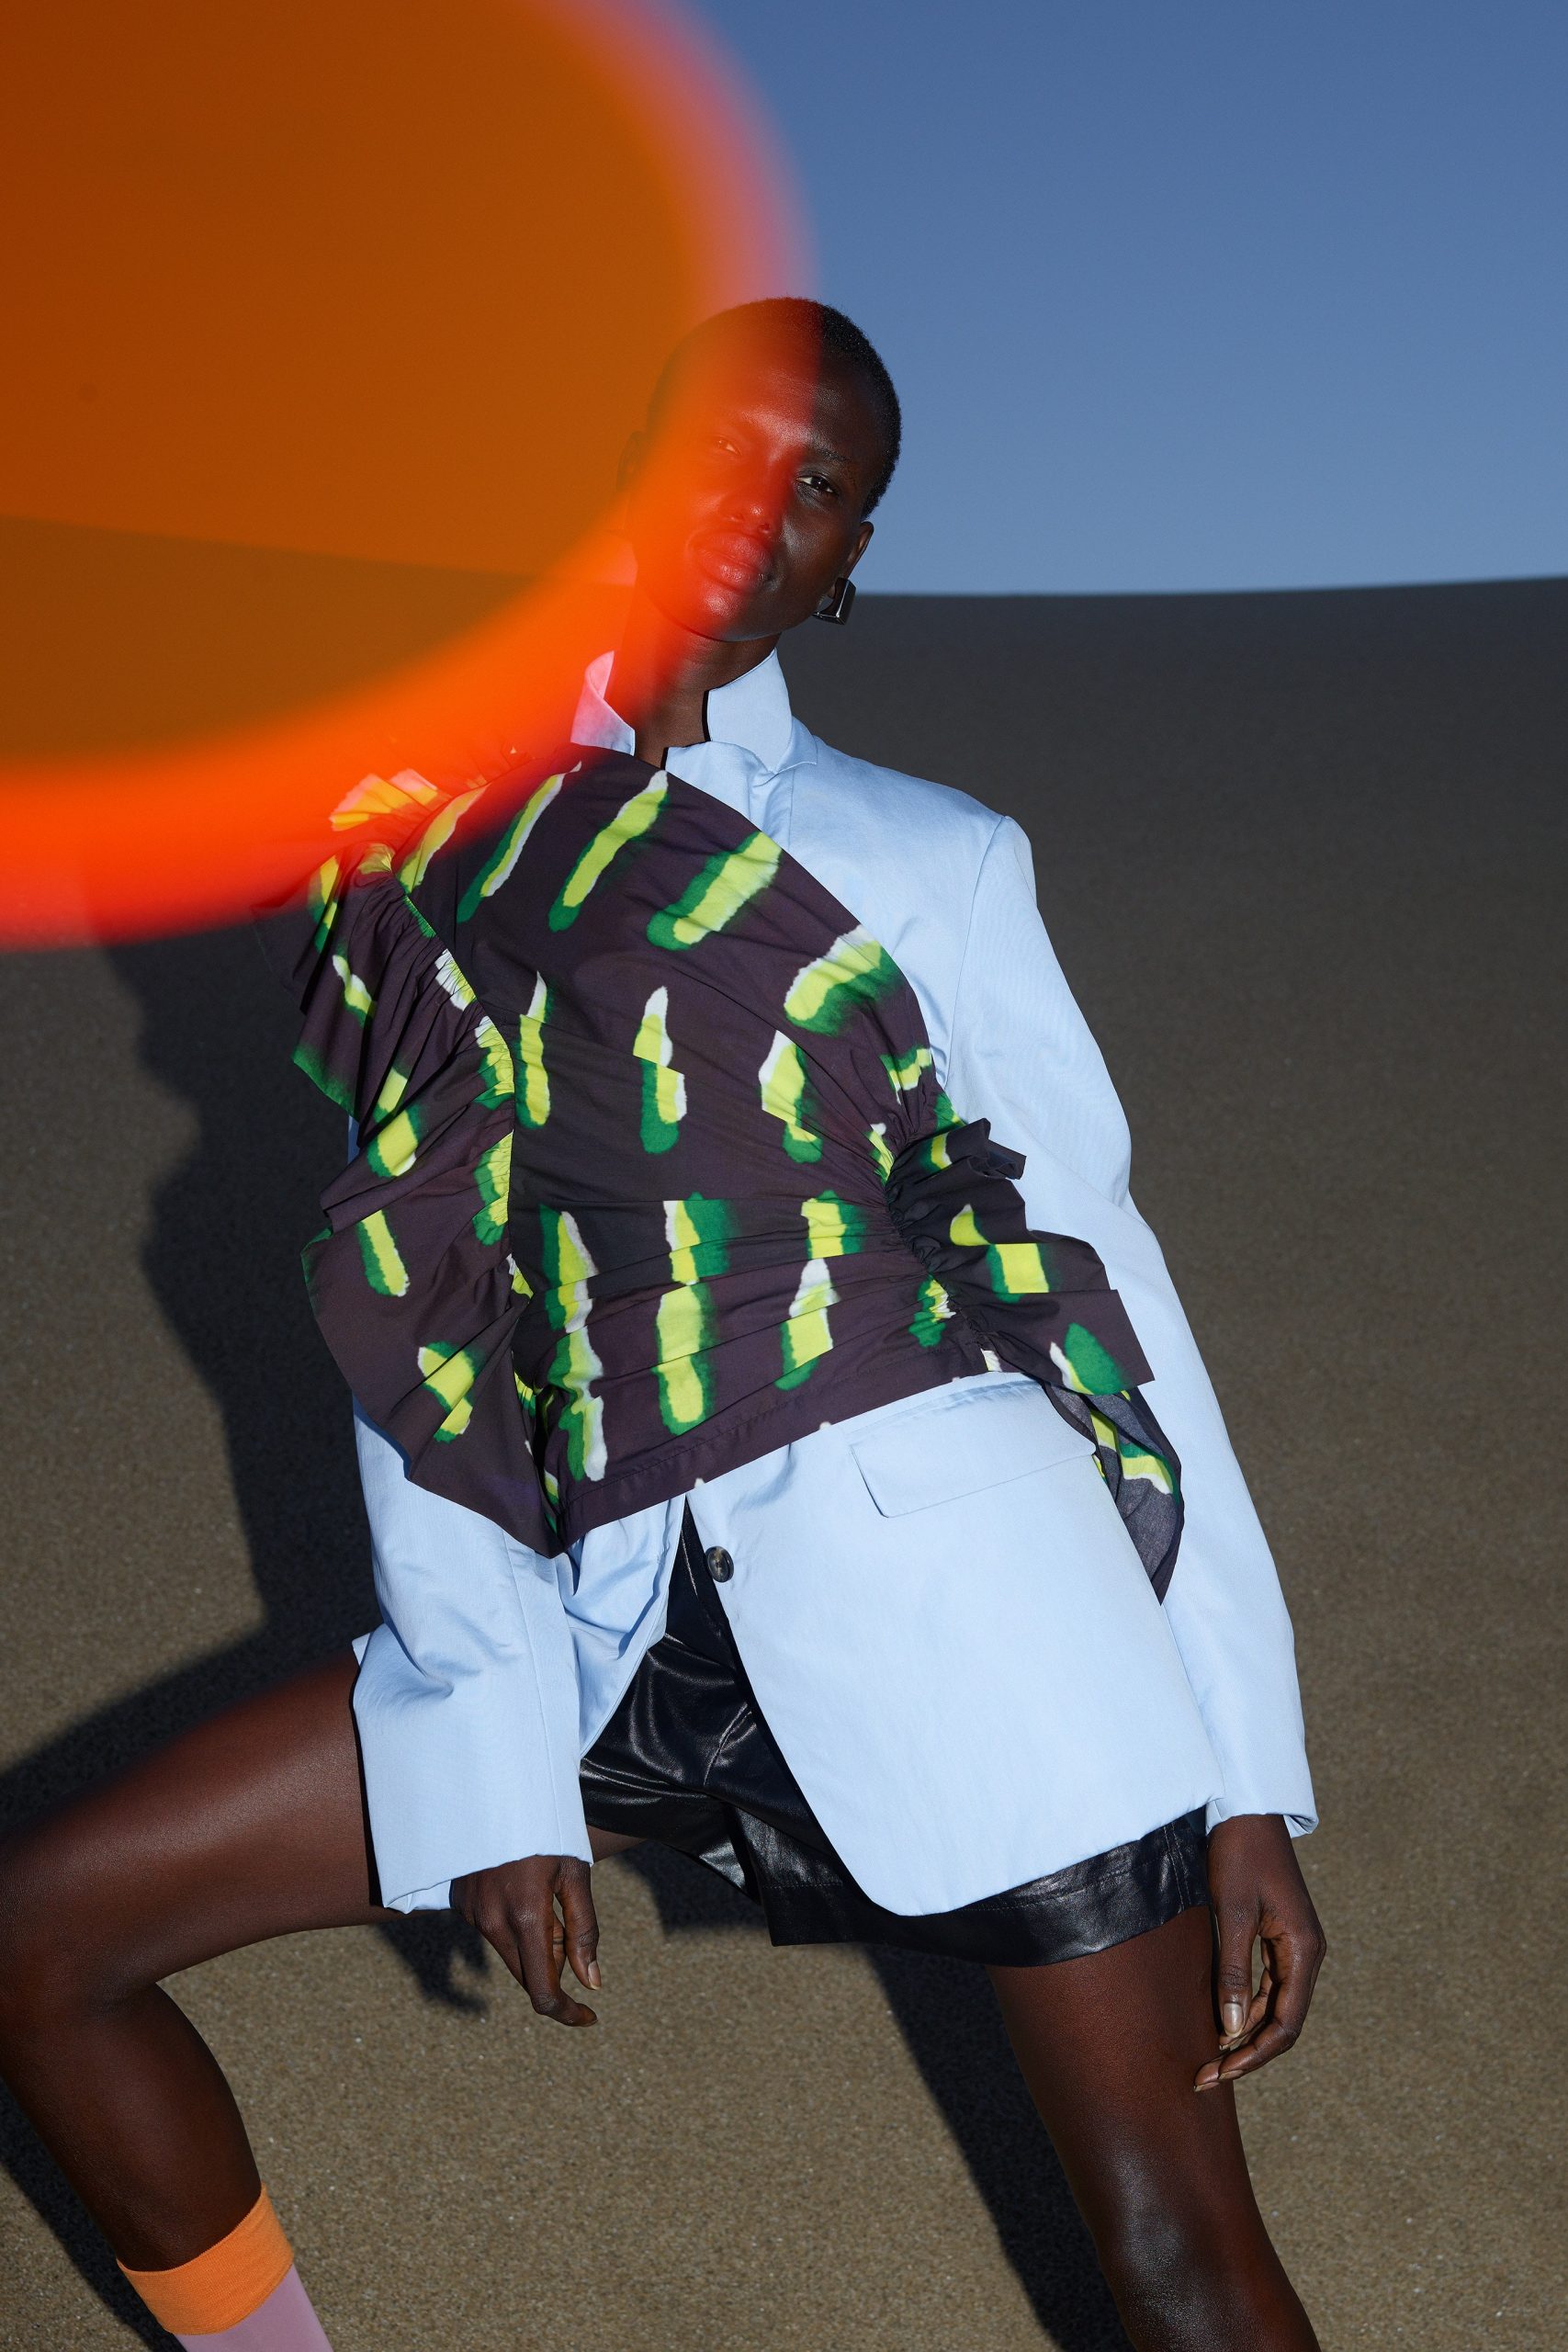 Viviane Sassen: Works for Sale, Upcoming Auctions & Past Results